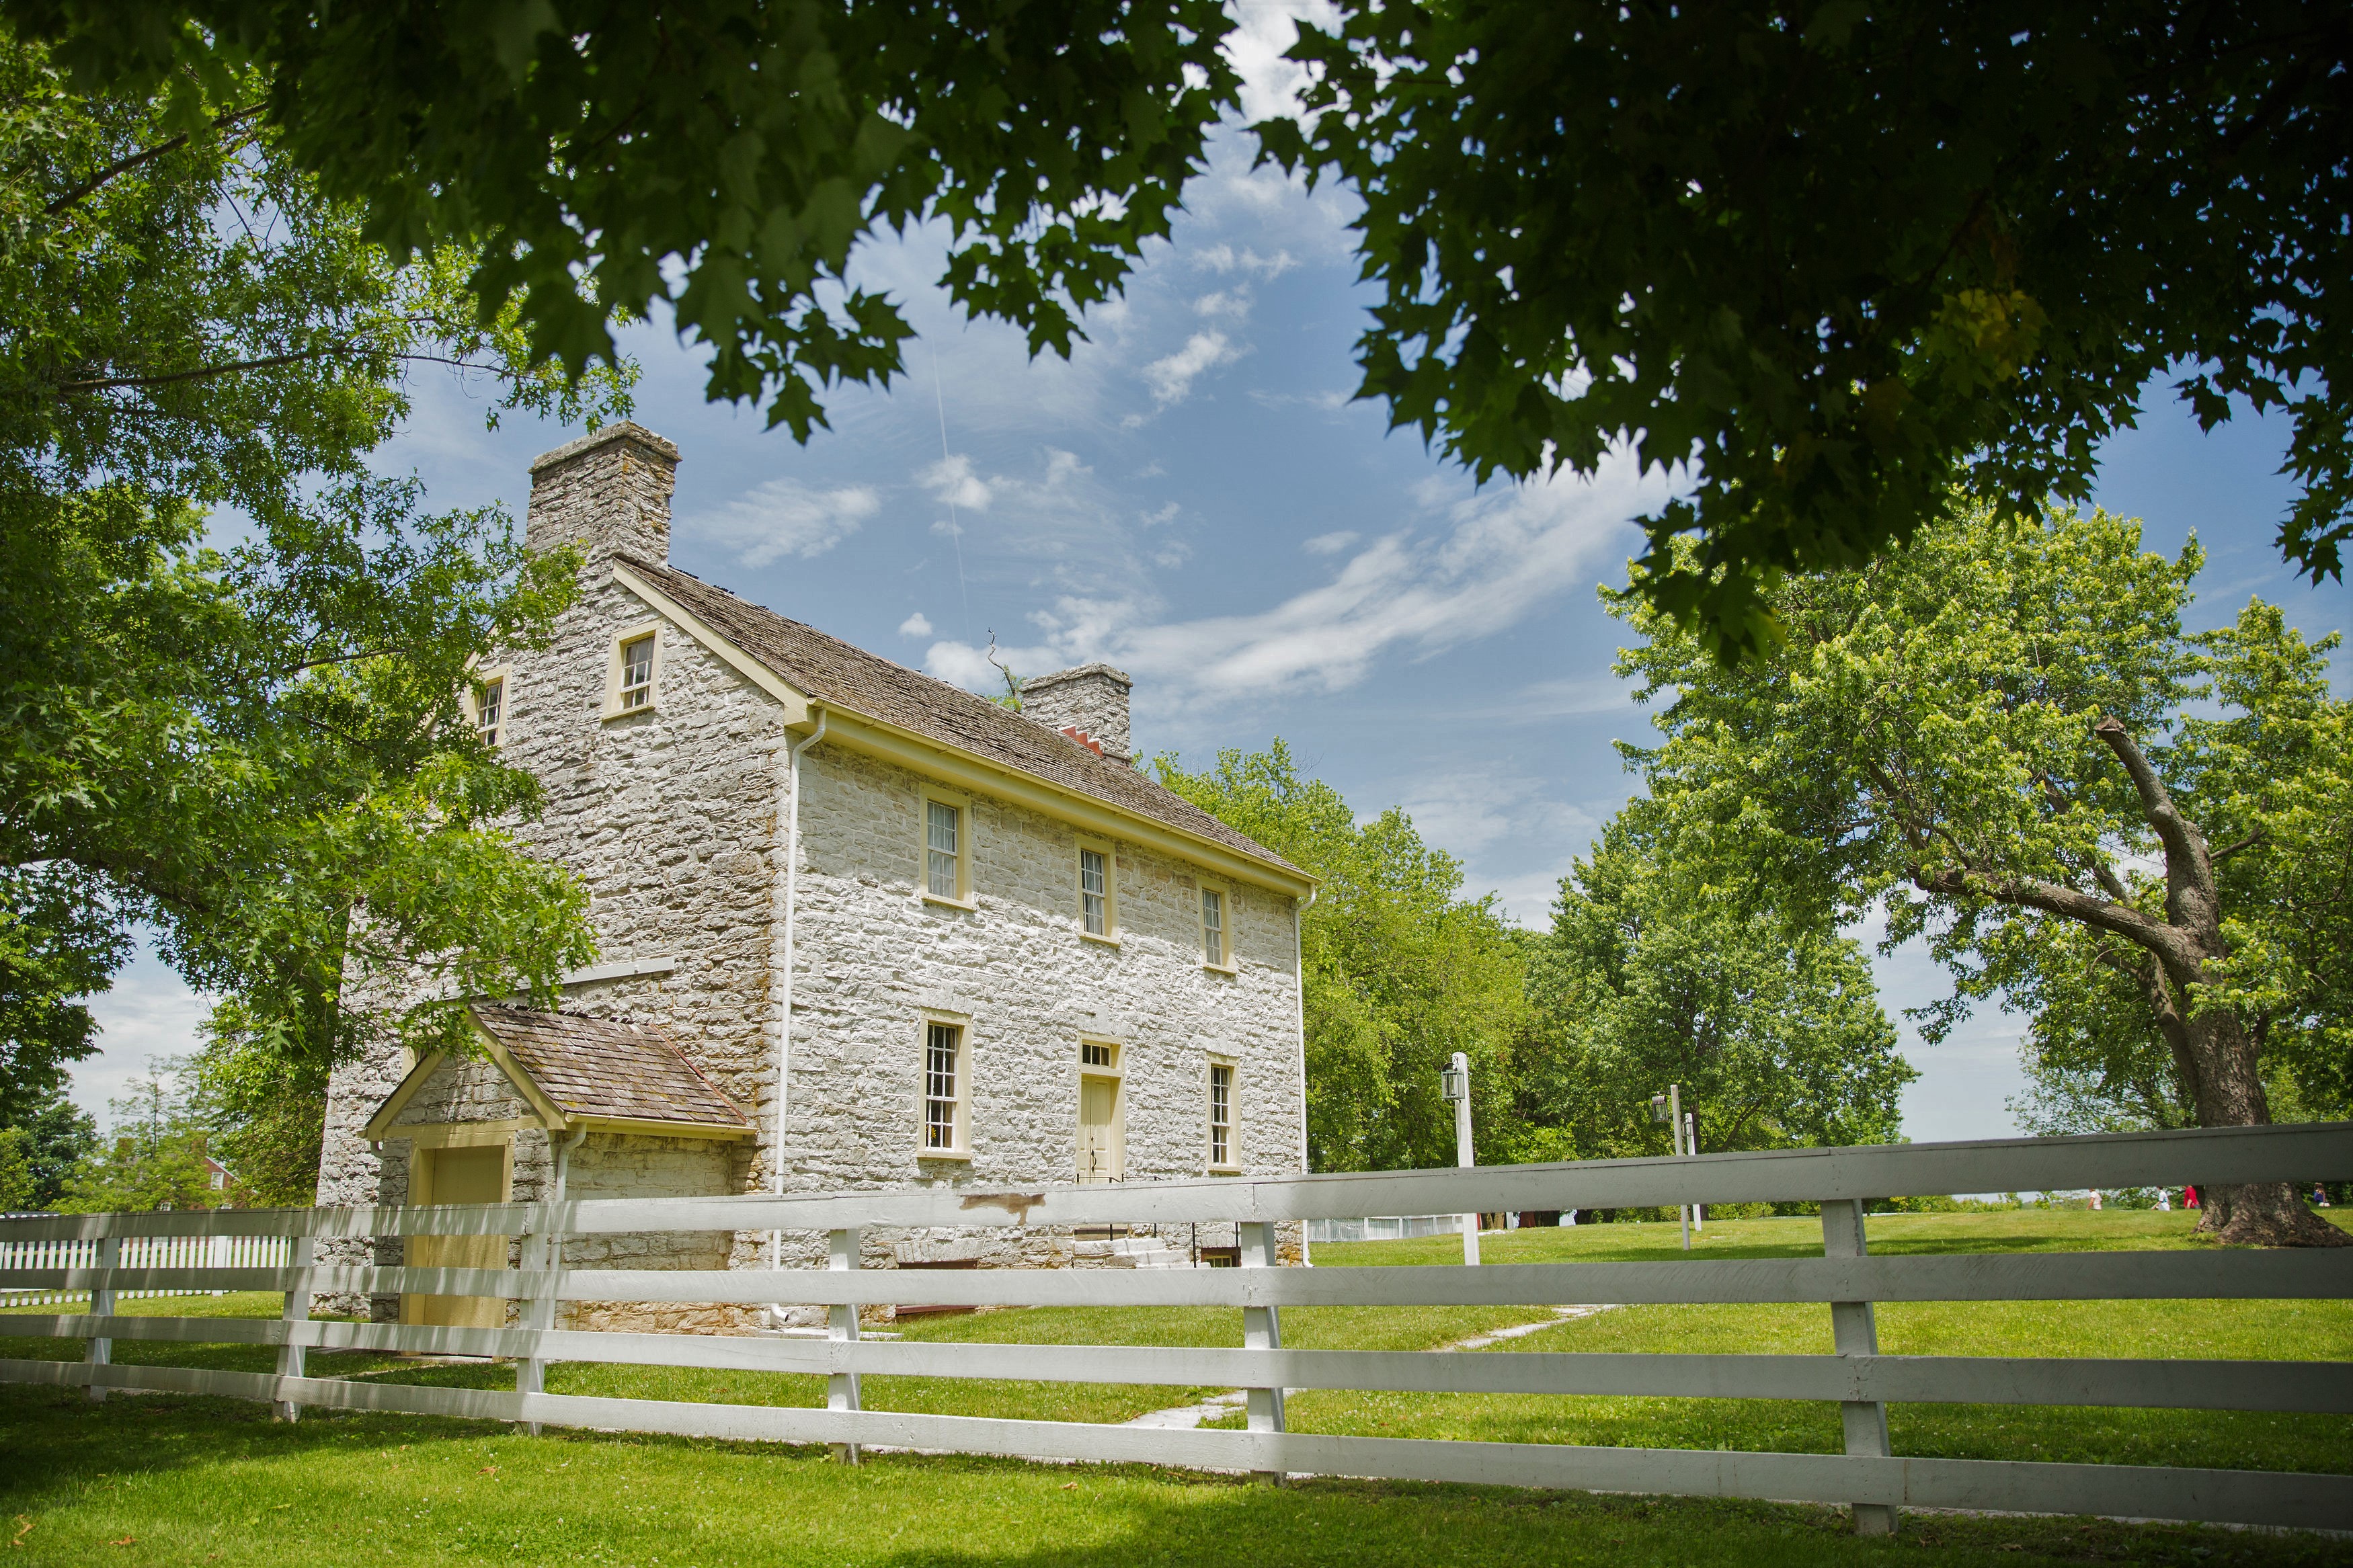 Historic Lodging at Shaker Villages included in Inn Packages